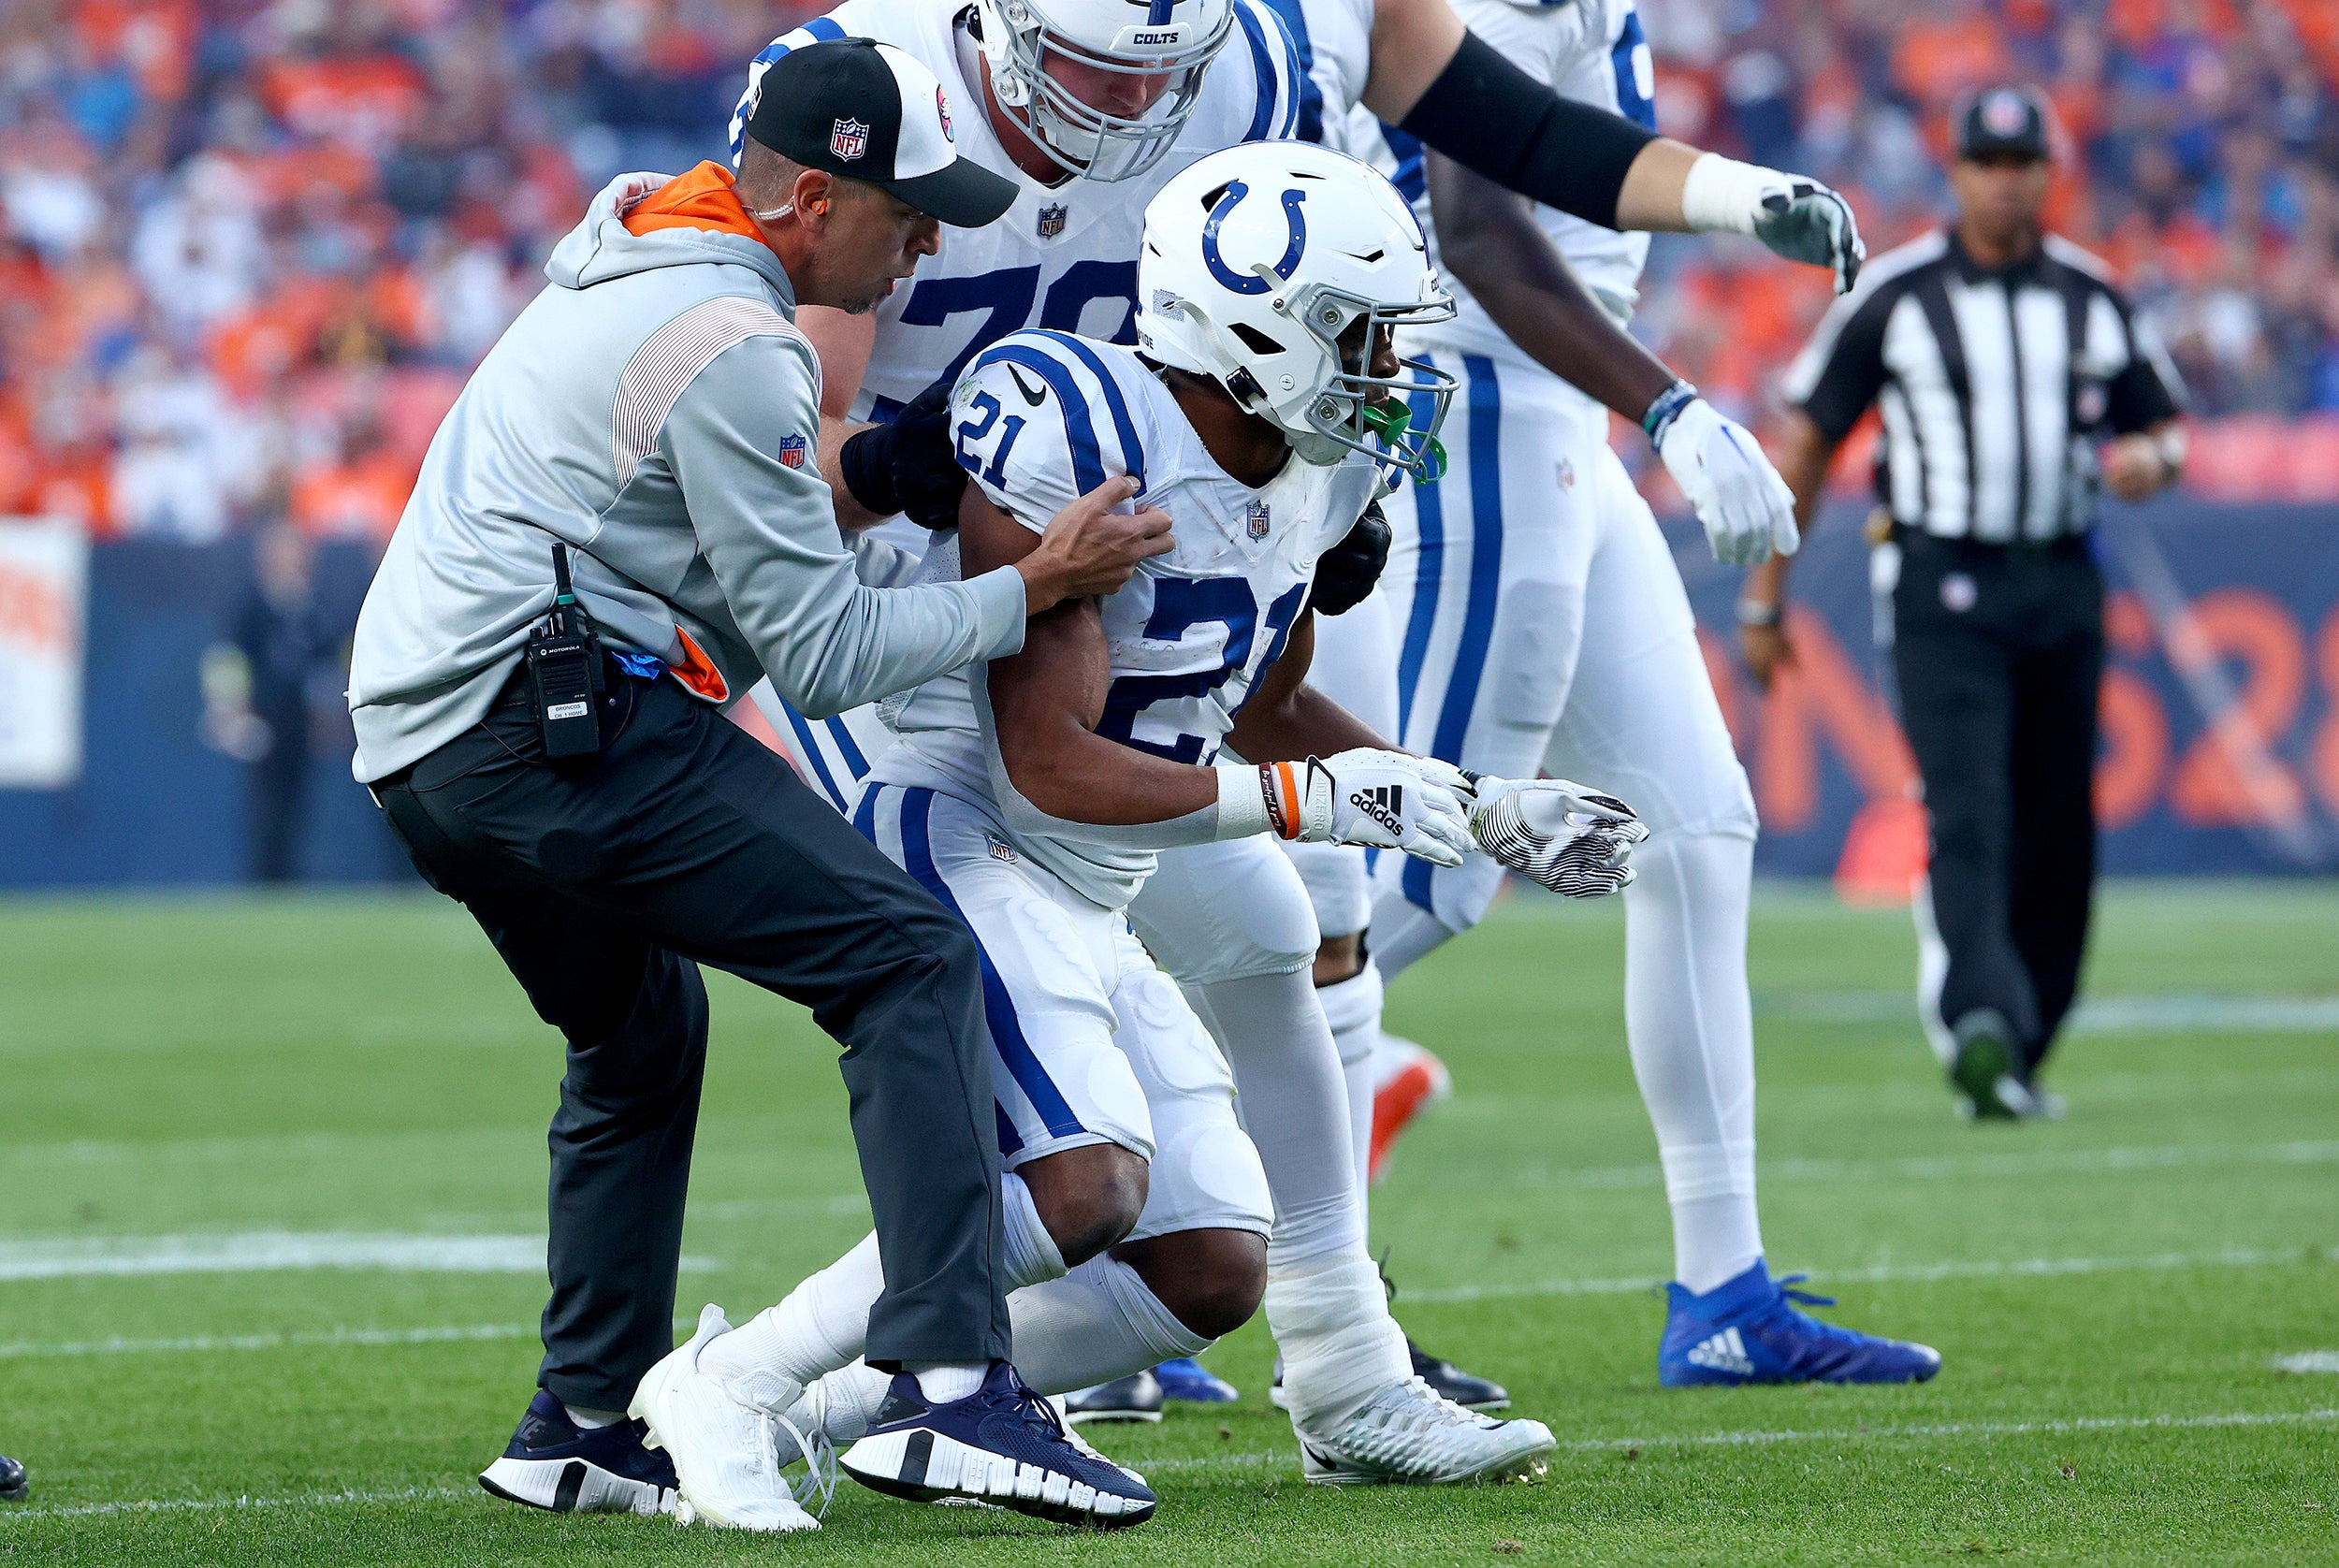 Colts RB Nyheim Hines has a concussion after big hit in Thursday night game,  team says - WISH-TV, Indianapolis News, Indiana Weather